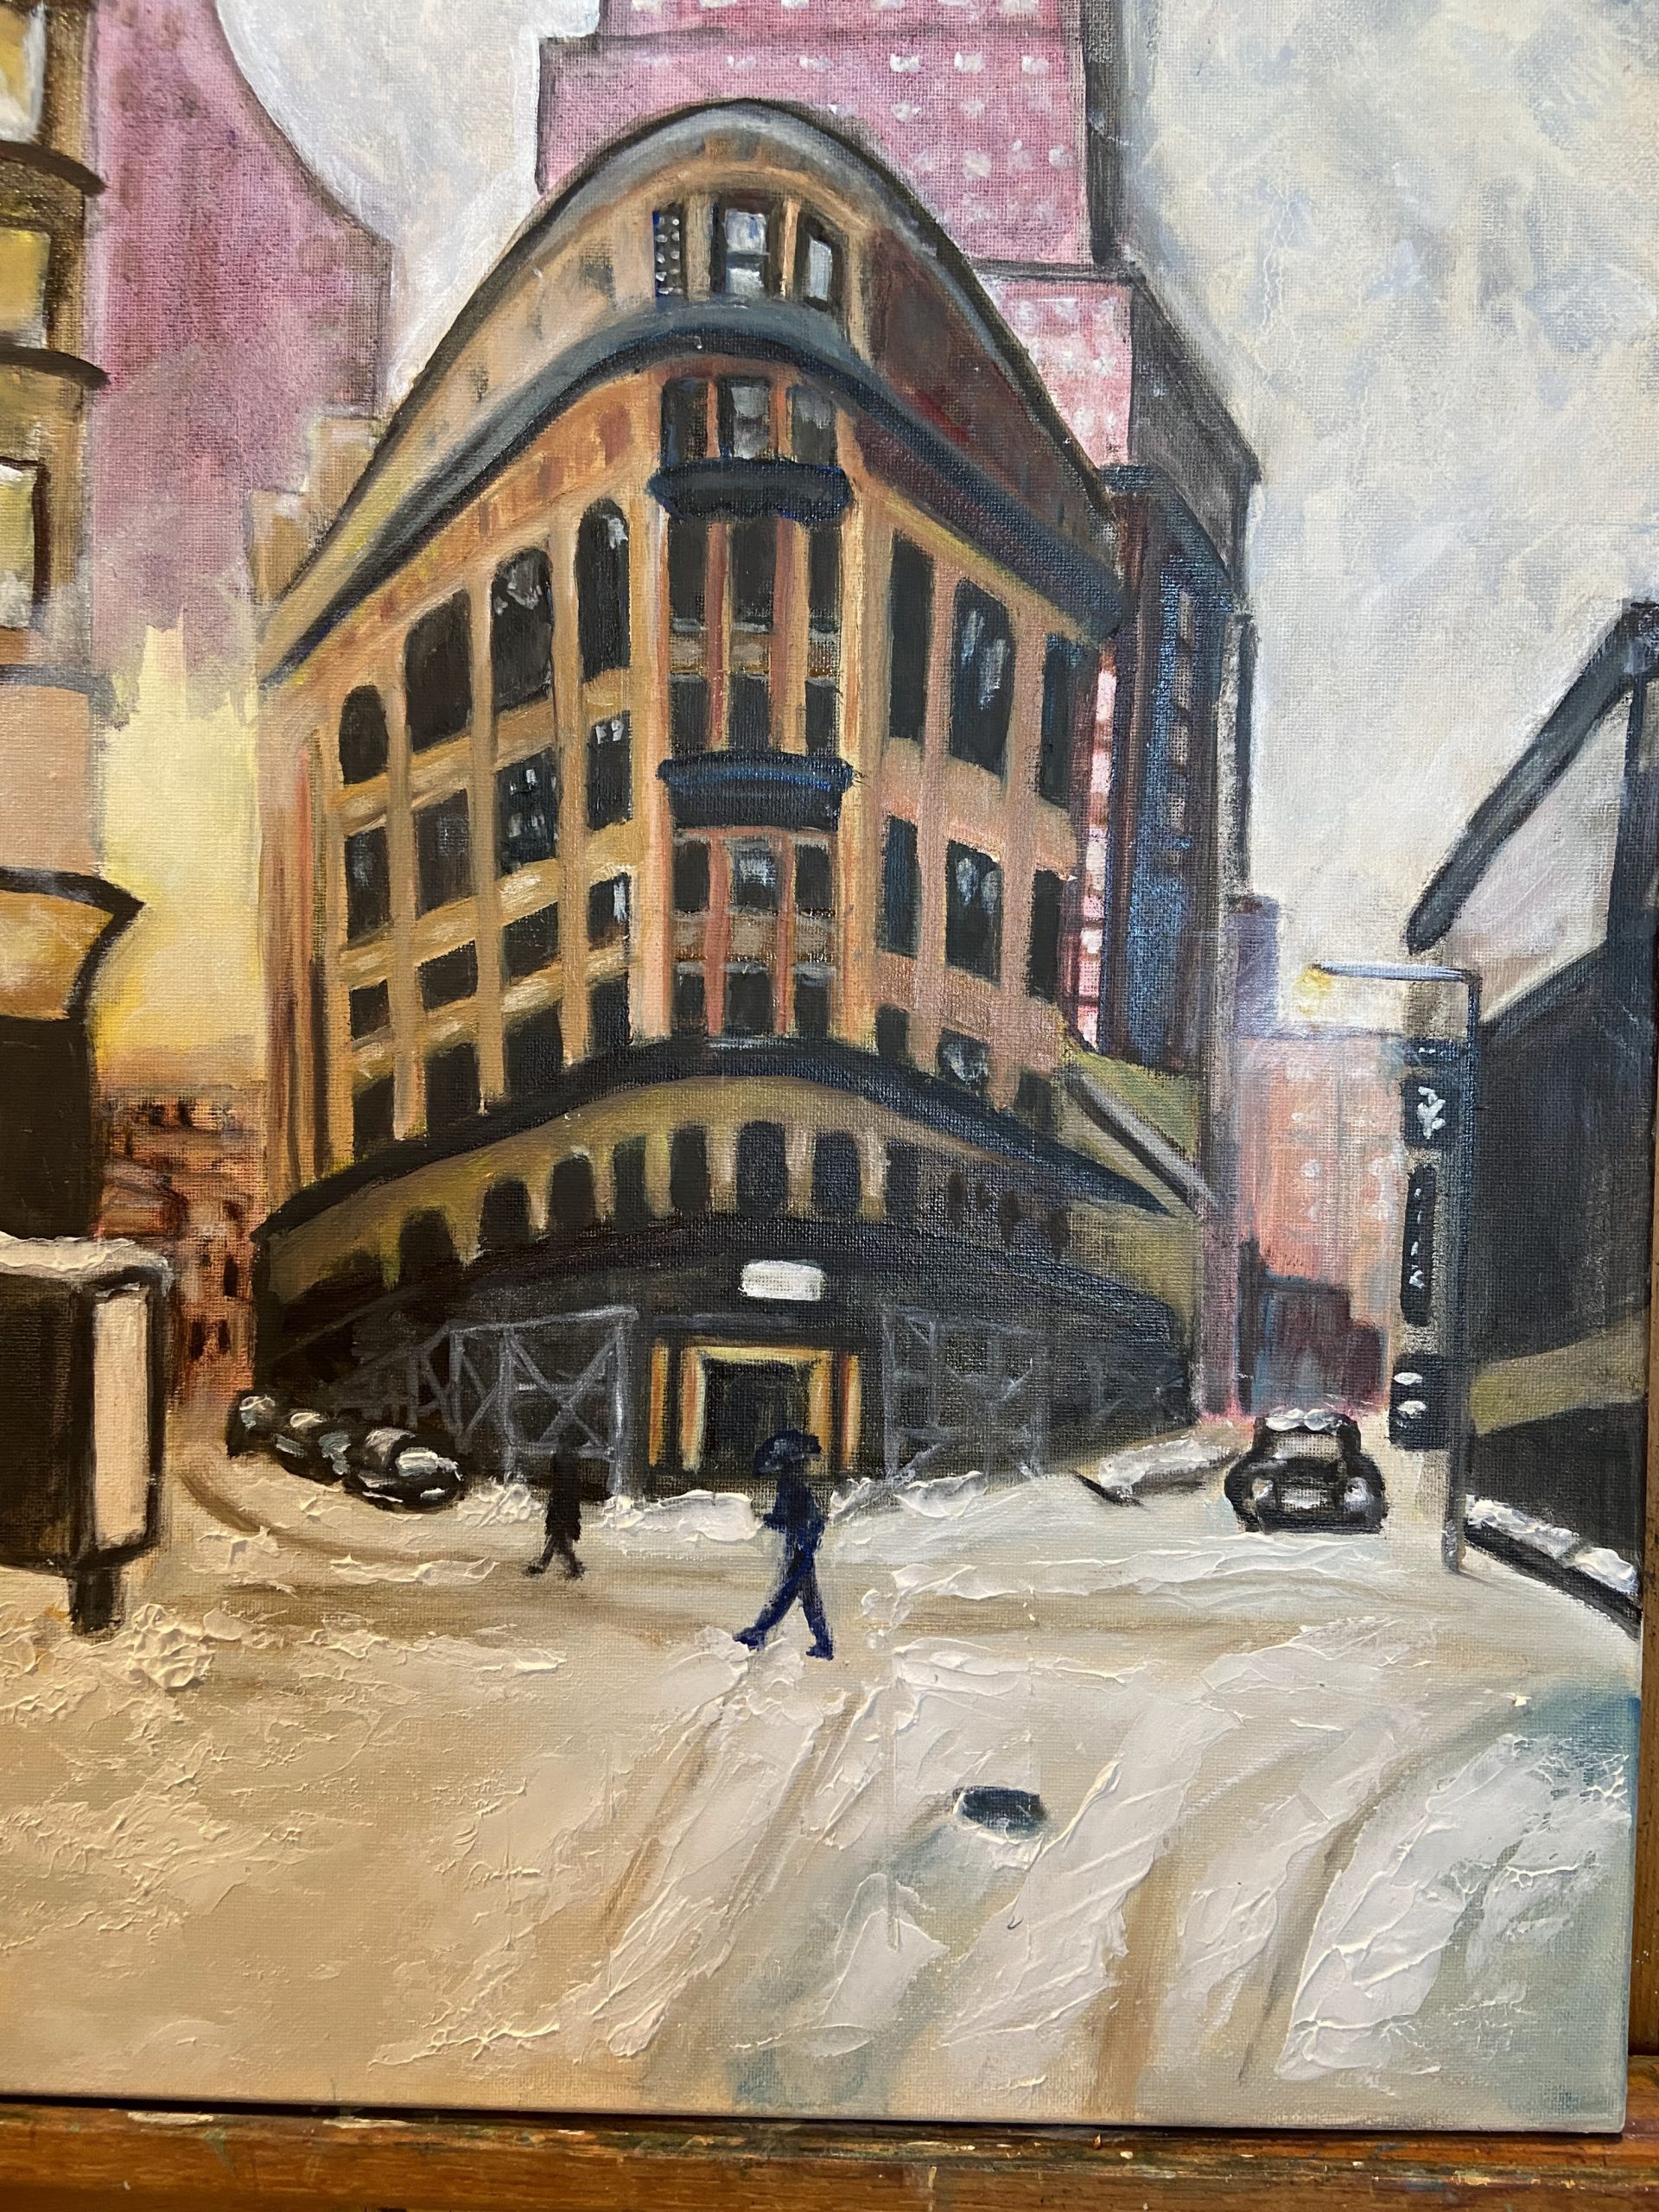 Oil painting of the Flatiron building in New York City 